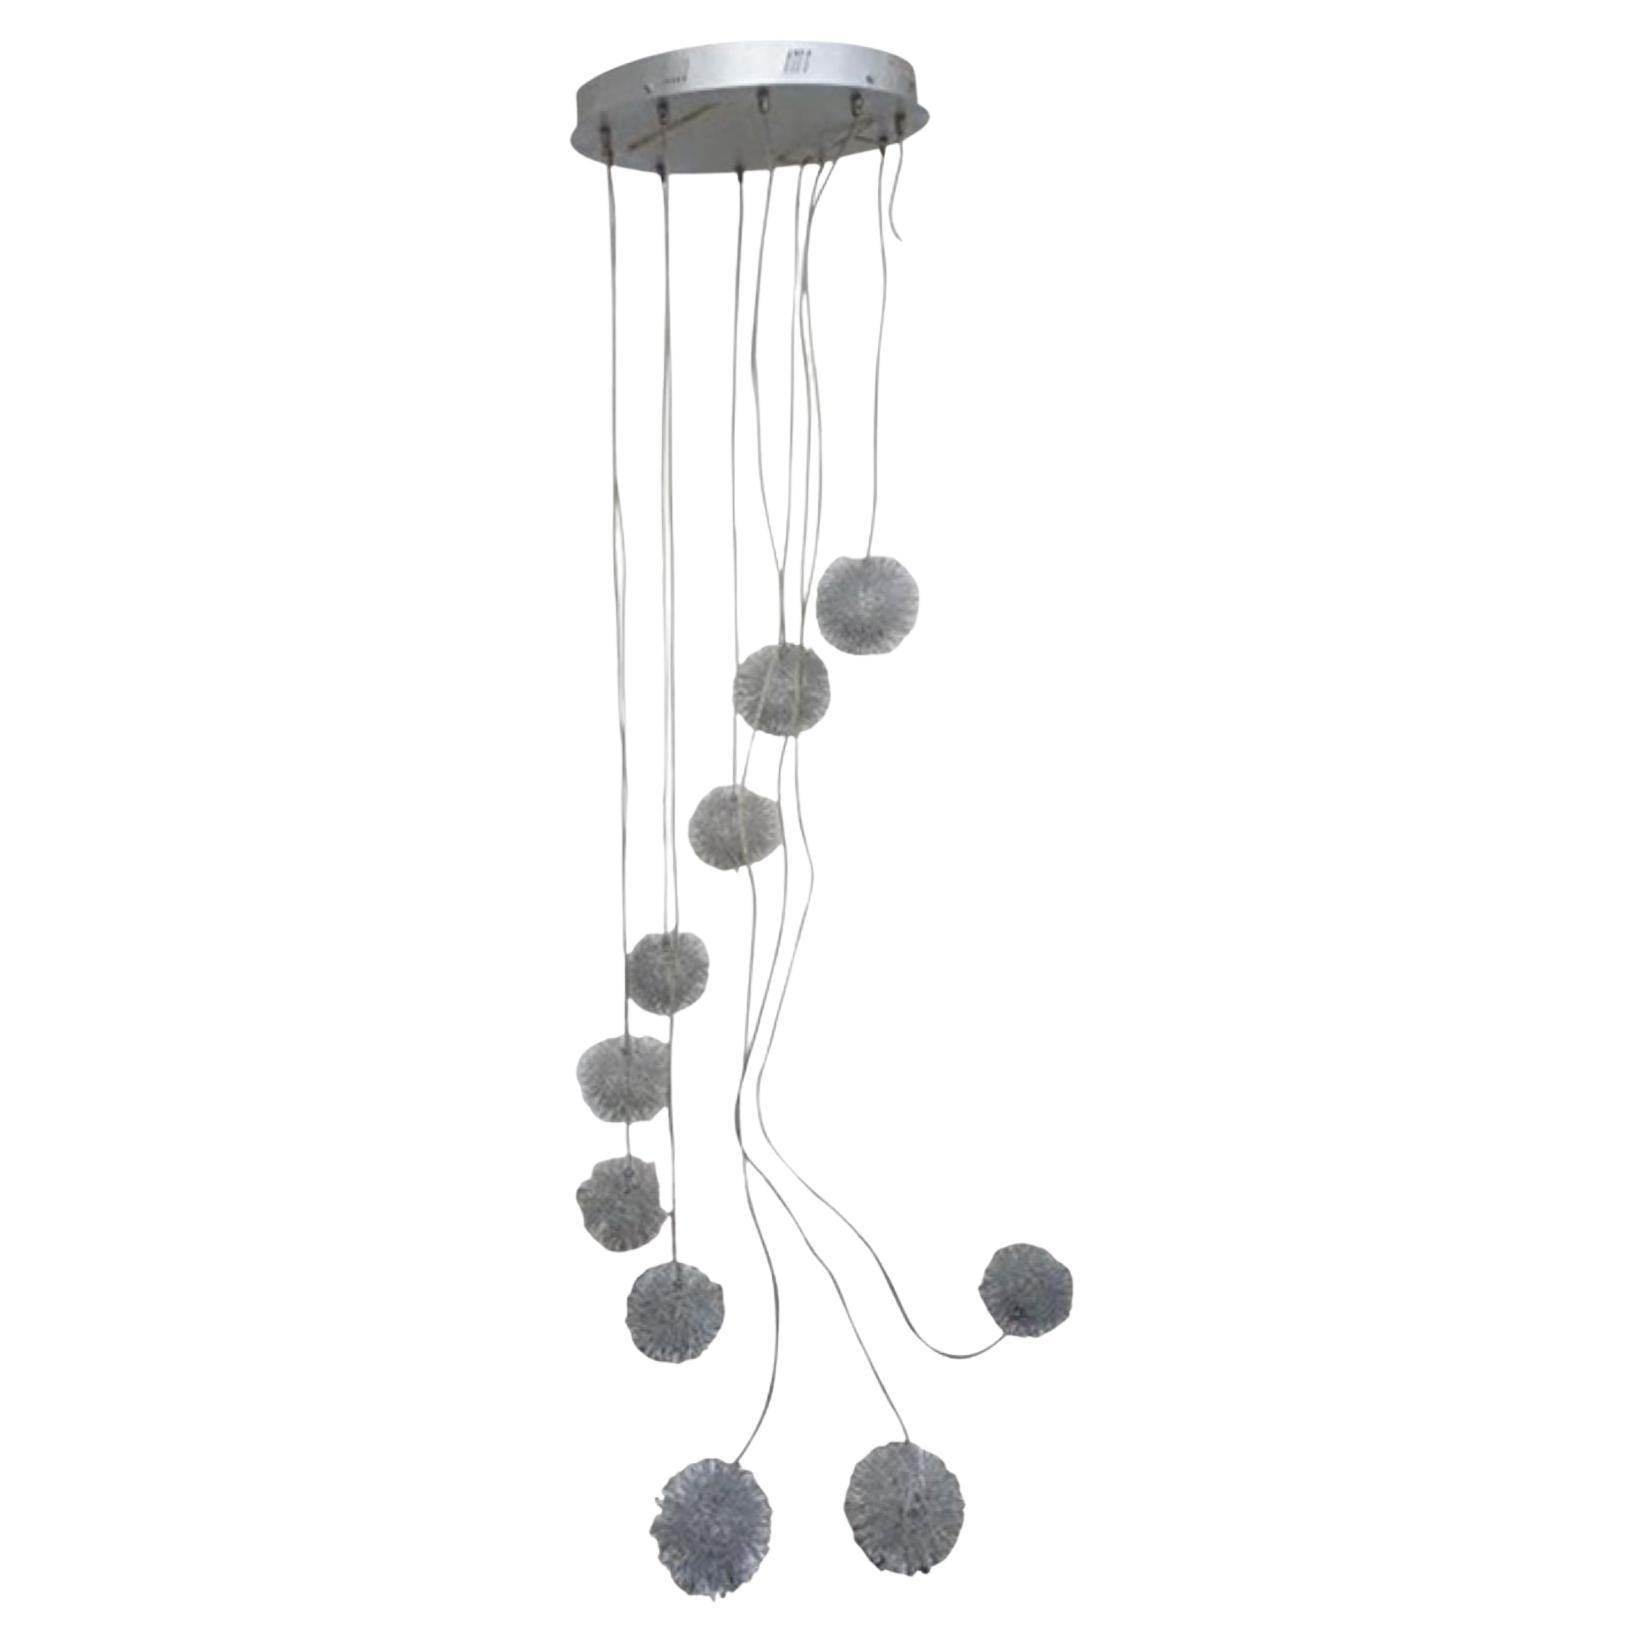 1980s Modern Aluminum Wire Hanging Pendant Lights For Sale